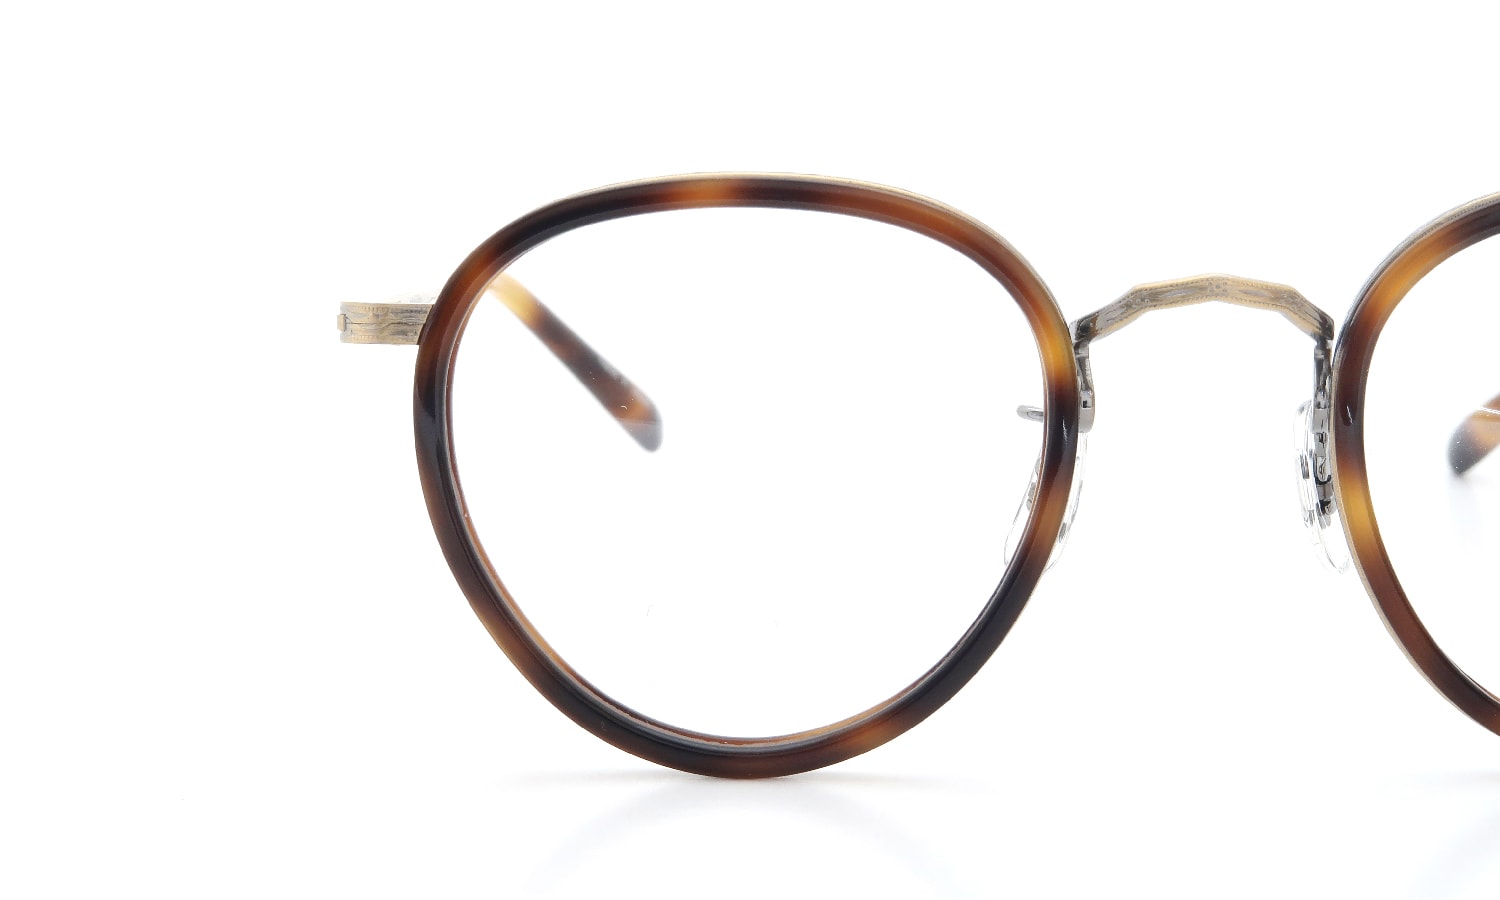 OLIVER PEOPLES オリバーピープルズ 定番メガネ通販 MP-2 DM Limited Edition 雅 (生産：オプテックジャパン期)  ポンメガネ